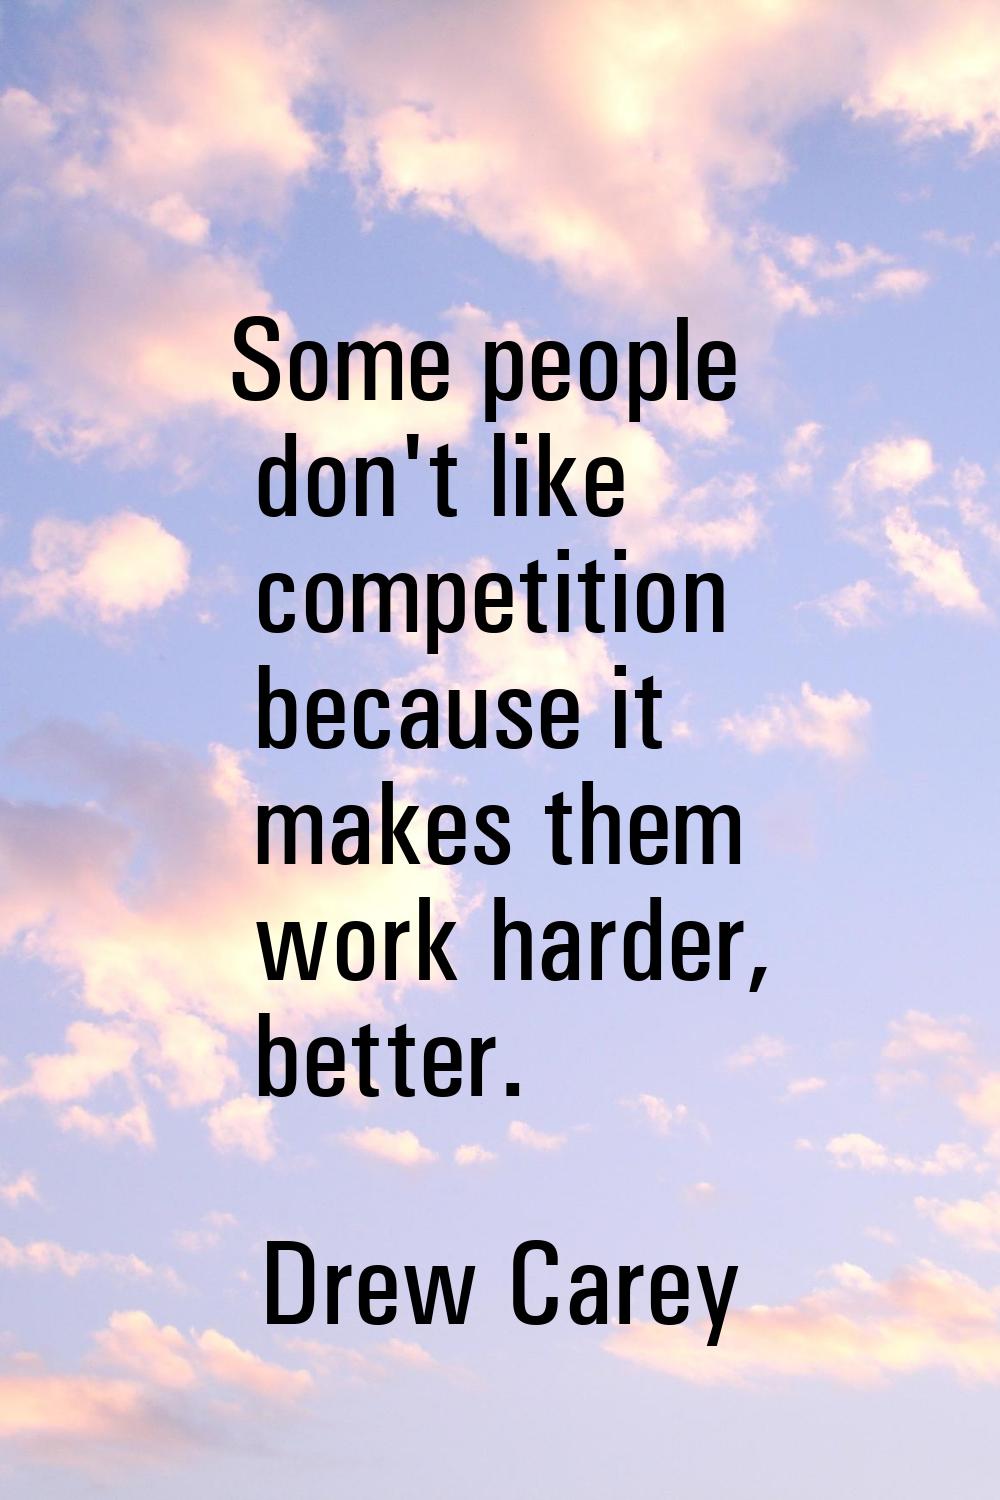 Some people don't like competition because it makes them work harder, better.